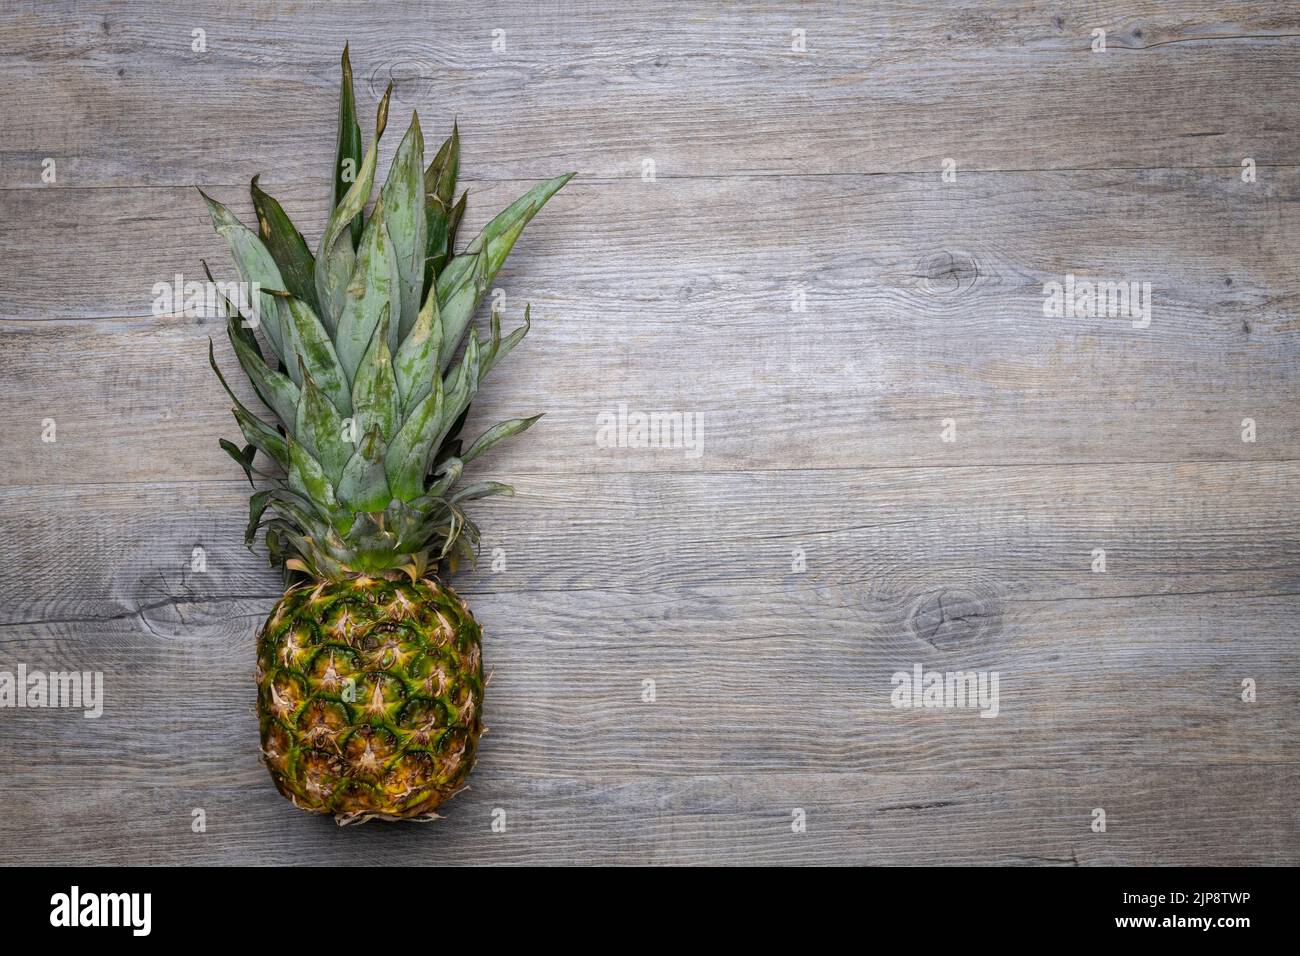 Whole pineapple on a wooden table Stock Photo